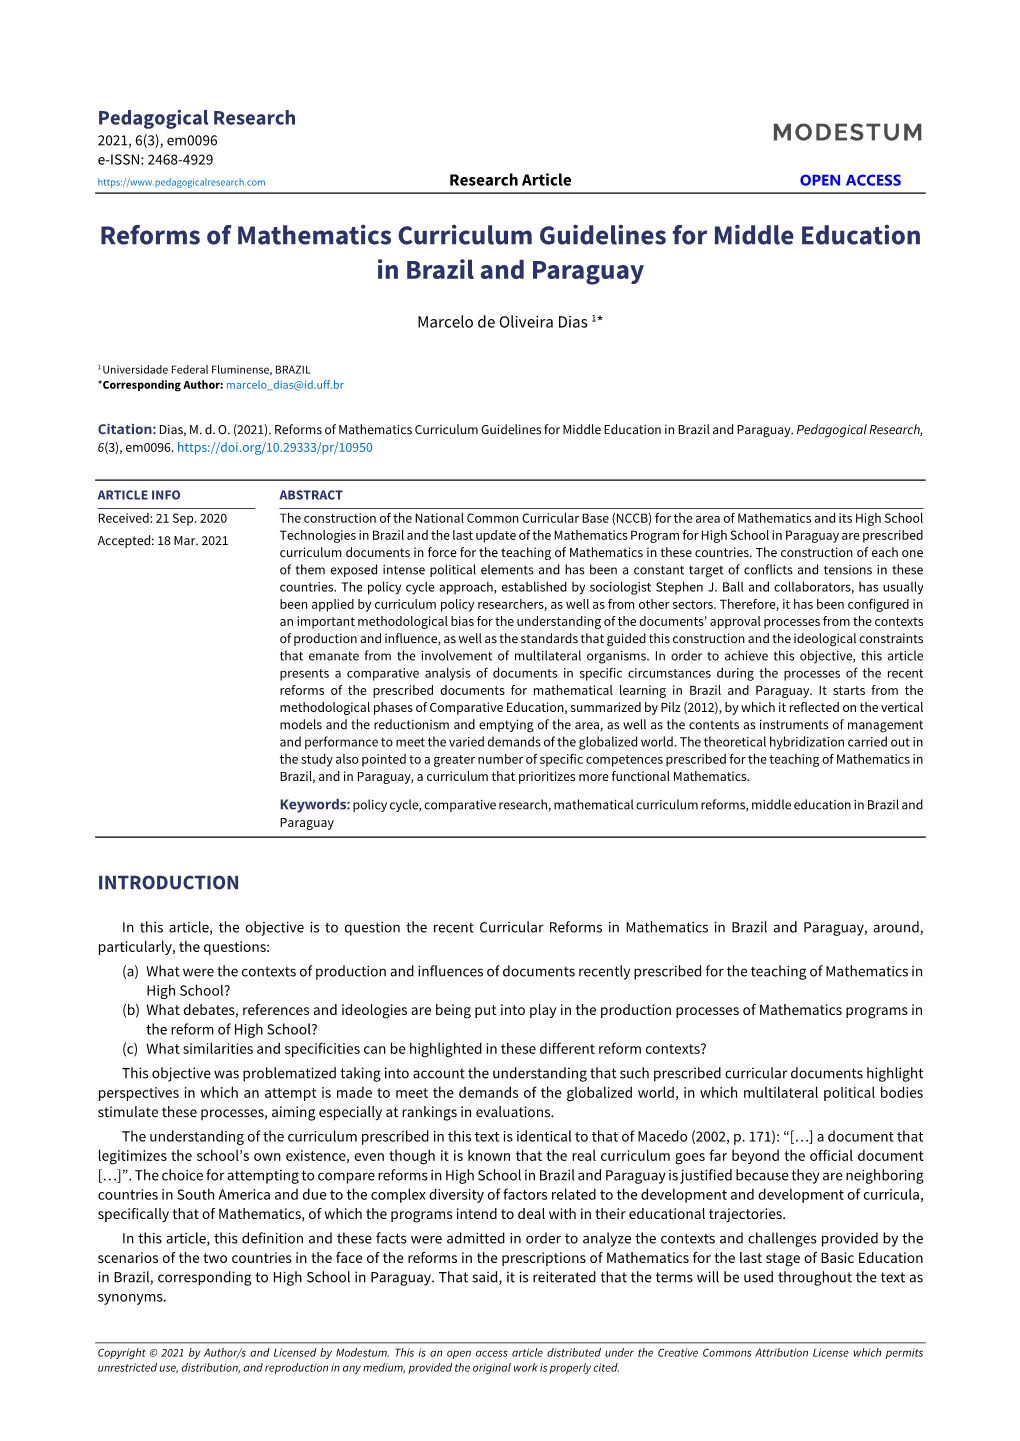 Reforms of Mathematics Curriculum Guidelines for Middle Education in Brazil and Paraguay